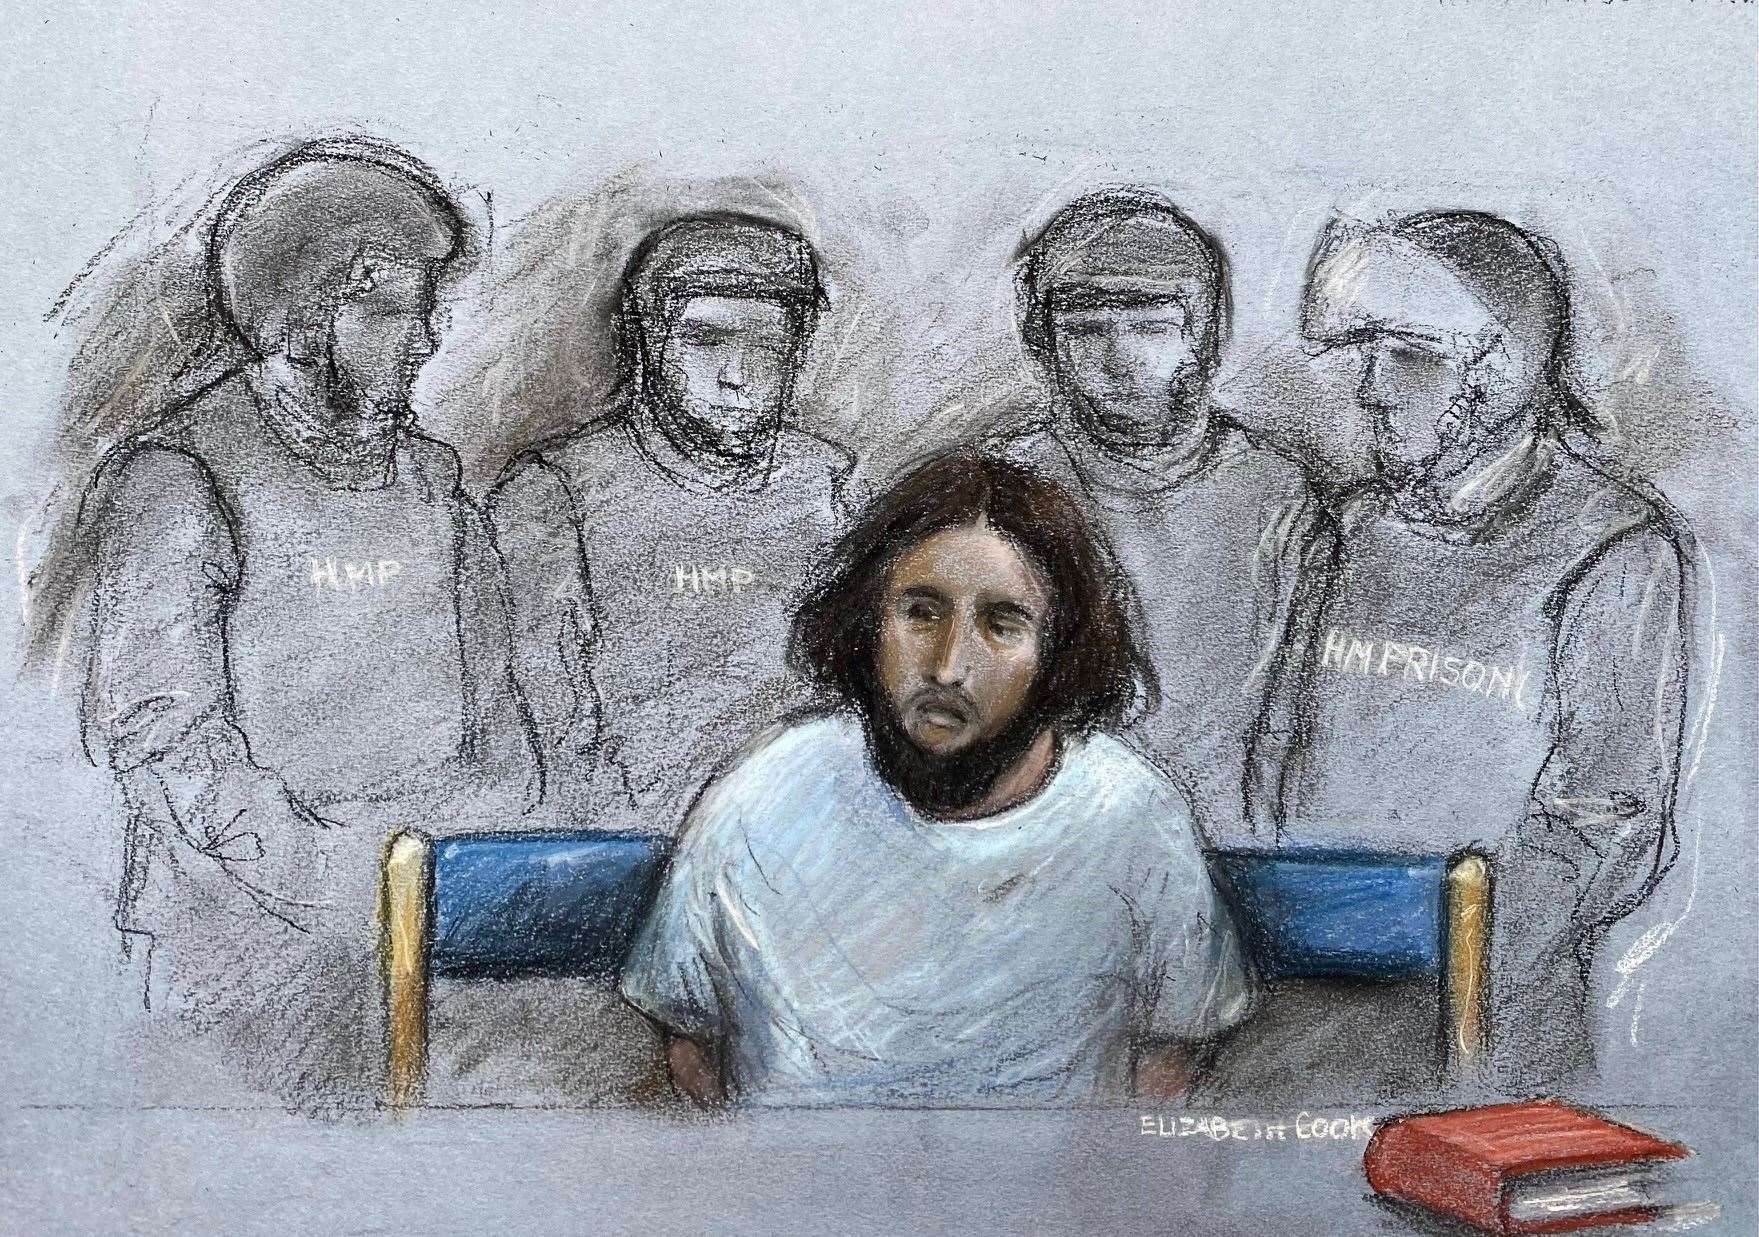 Court artist drawing of Ahmed Alid (Elizabeth Cook/PA)